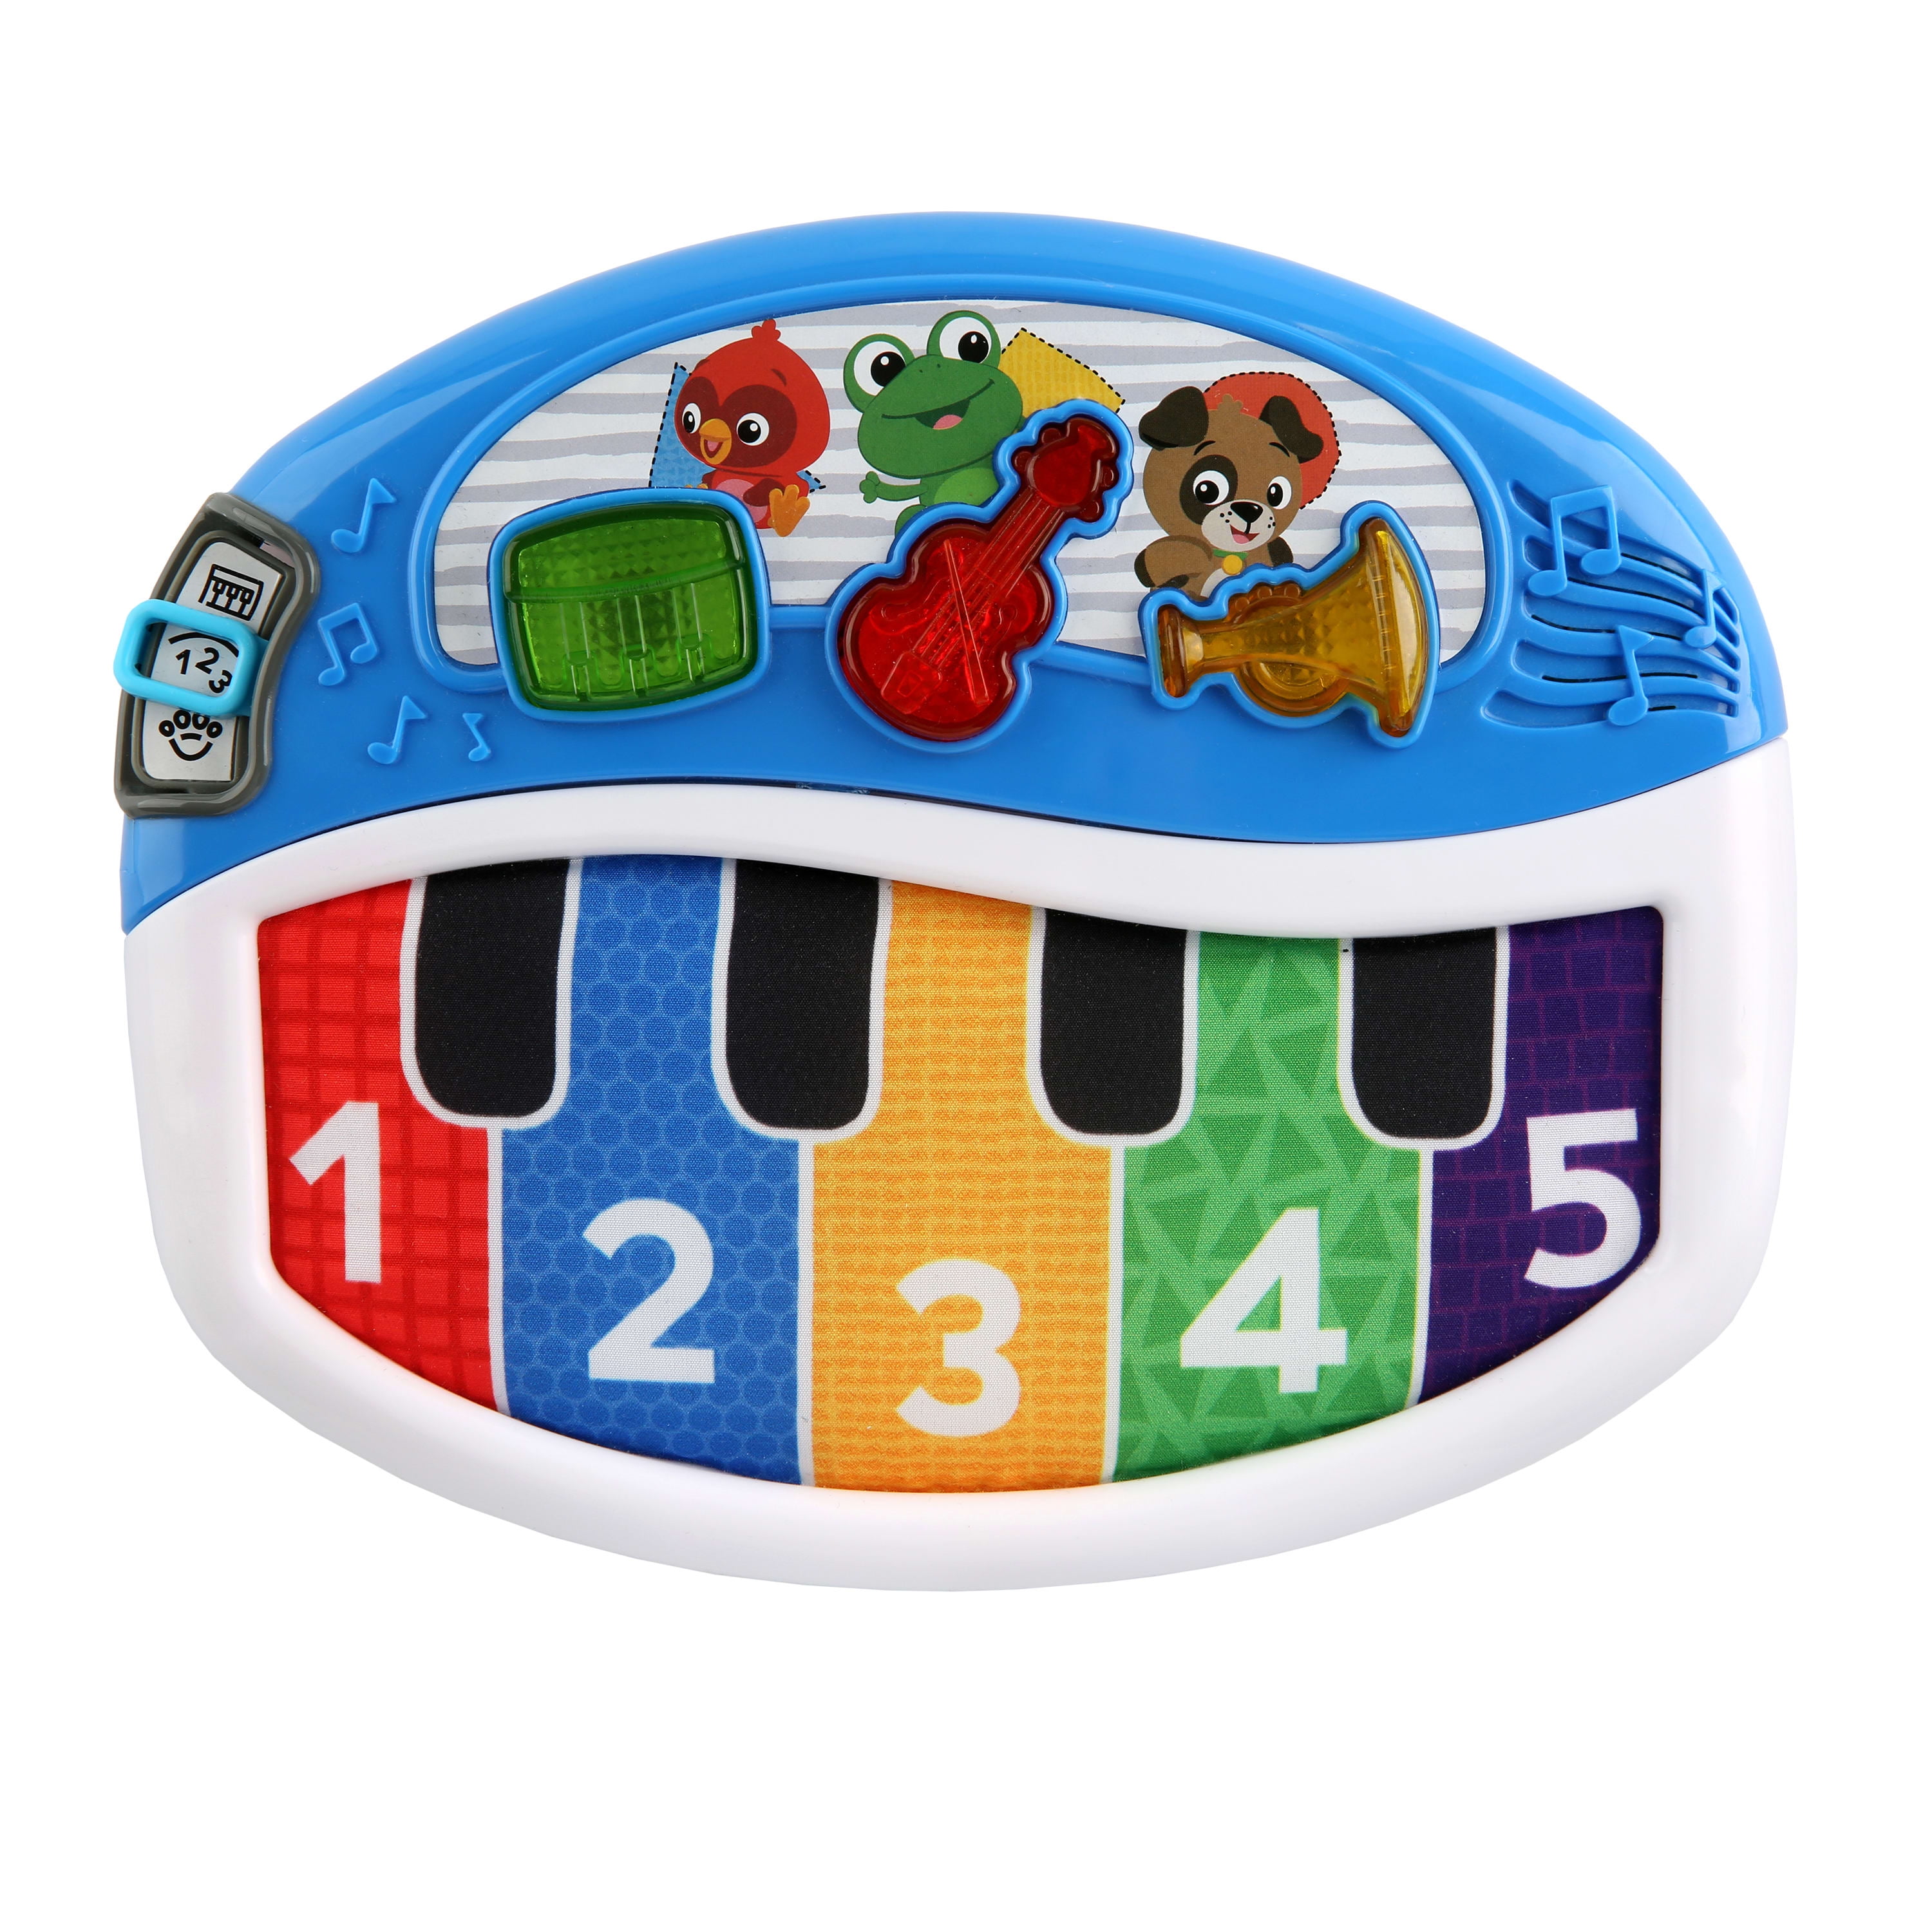 Baby Einstein Discover & Play Piano Musical Toy for Baby Boy or Girl Age 3  months and up